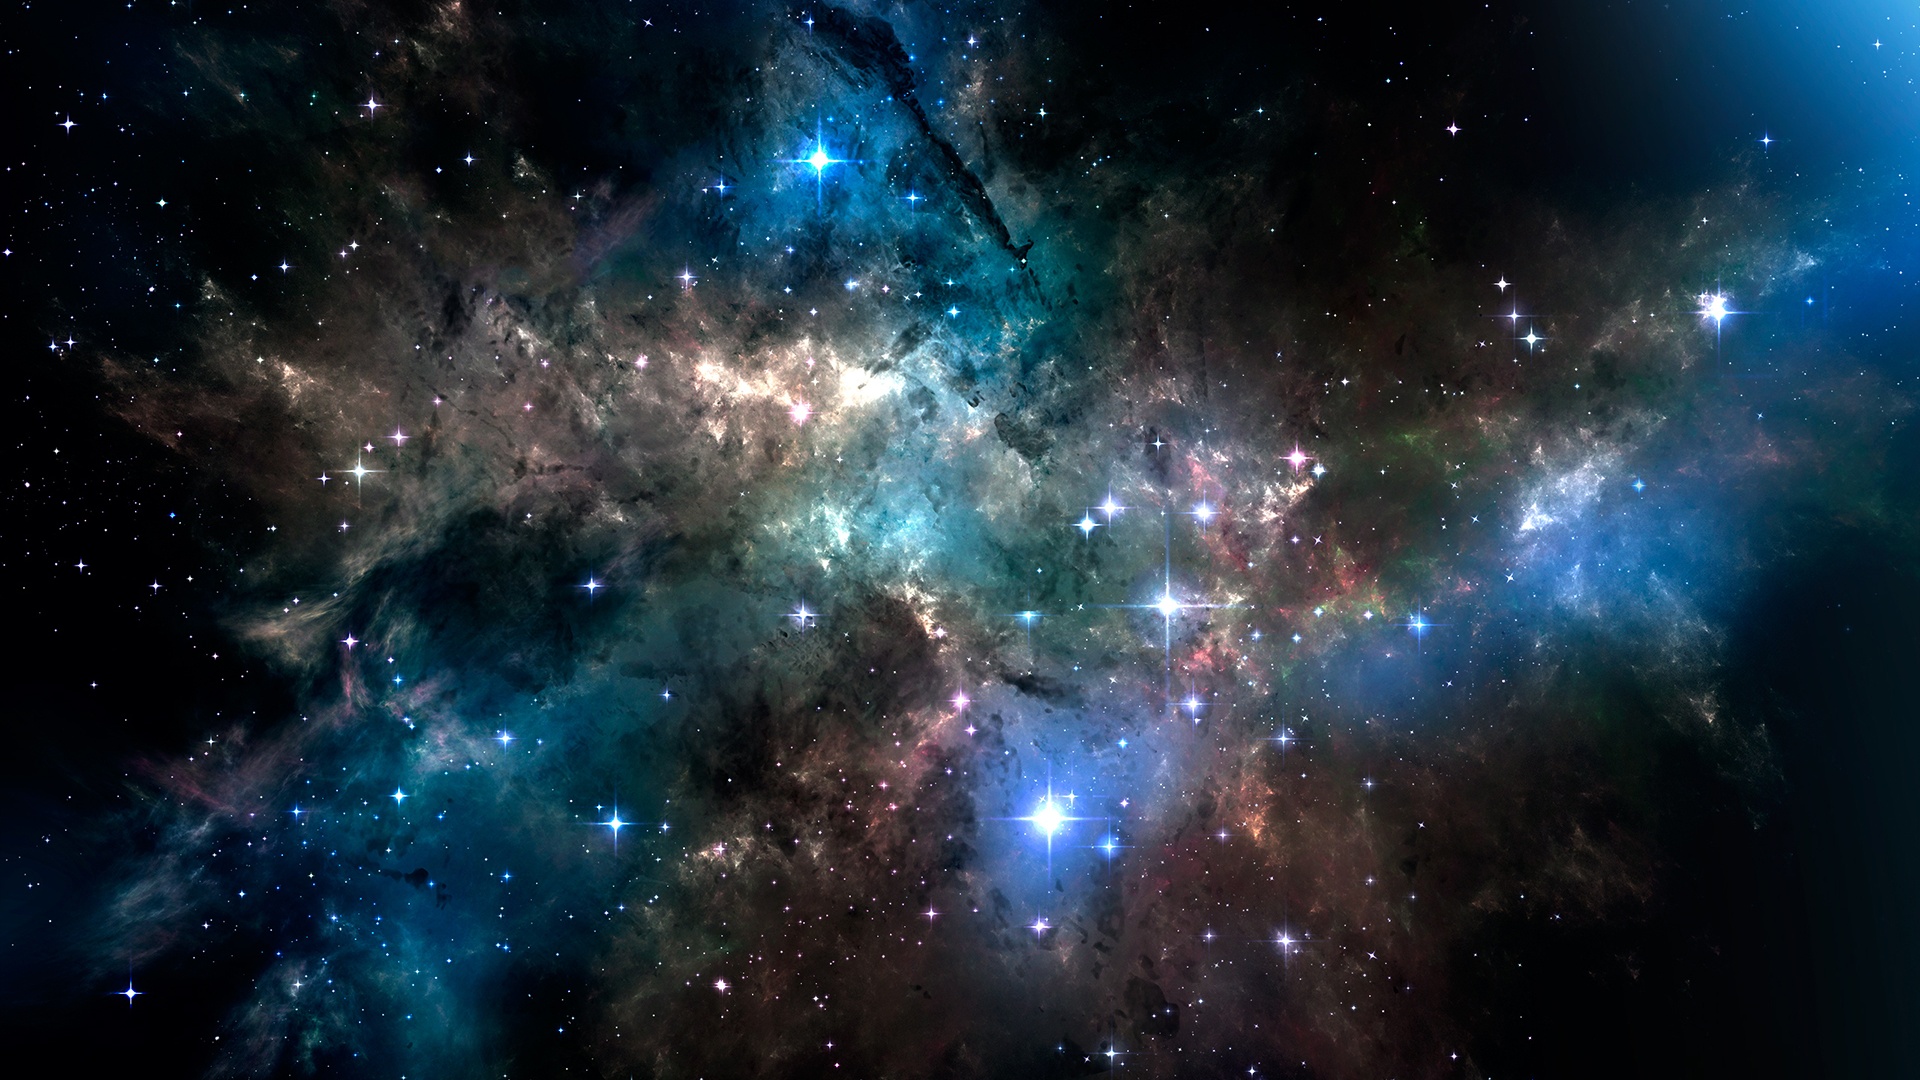 Free download Super HD Space Wallpapers HD WallpapersSparkling